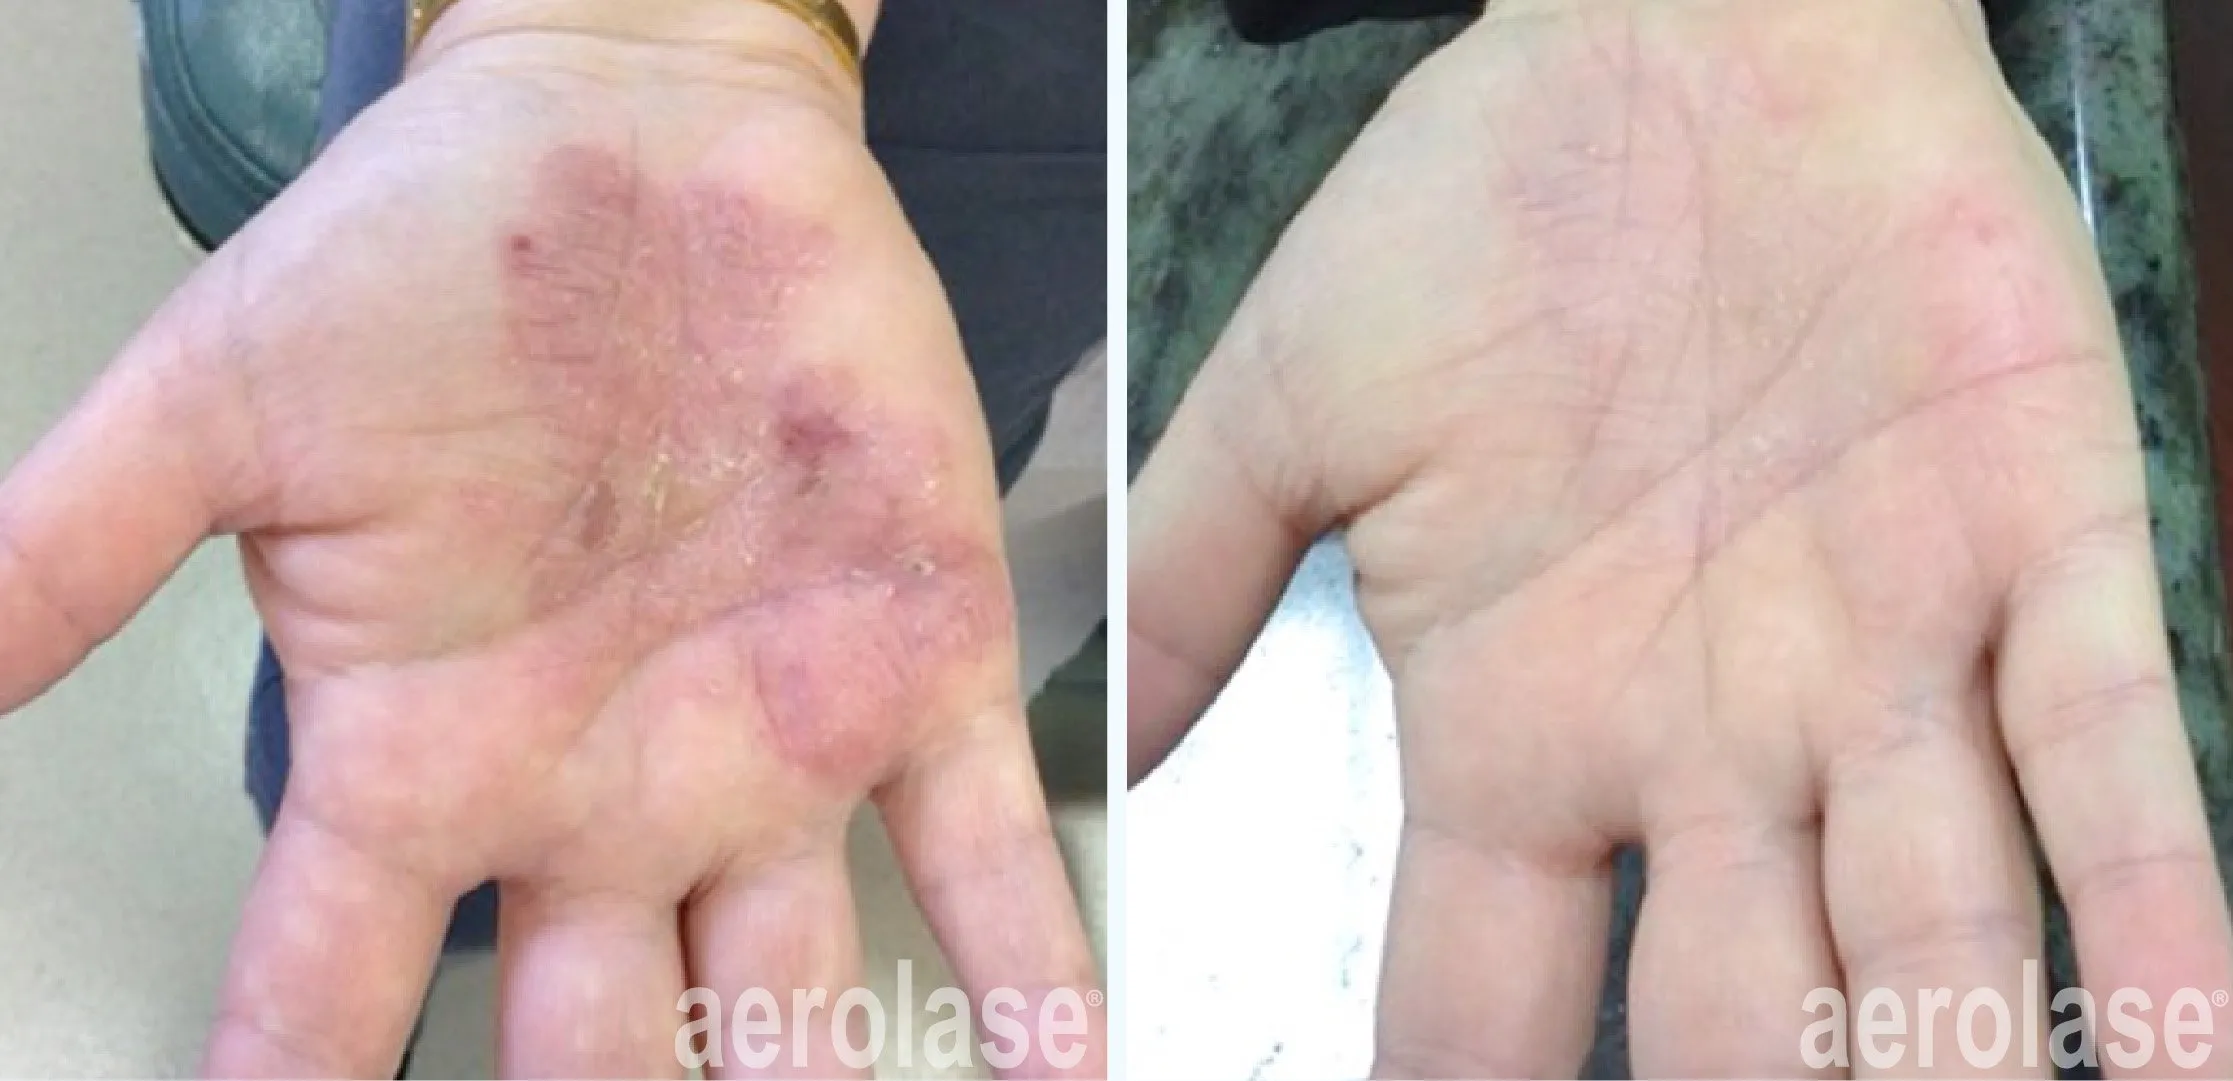 autoimmune-dieases-psoriasis-2-mark-nestor-before-and-after